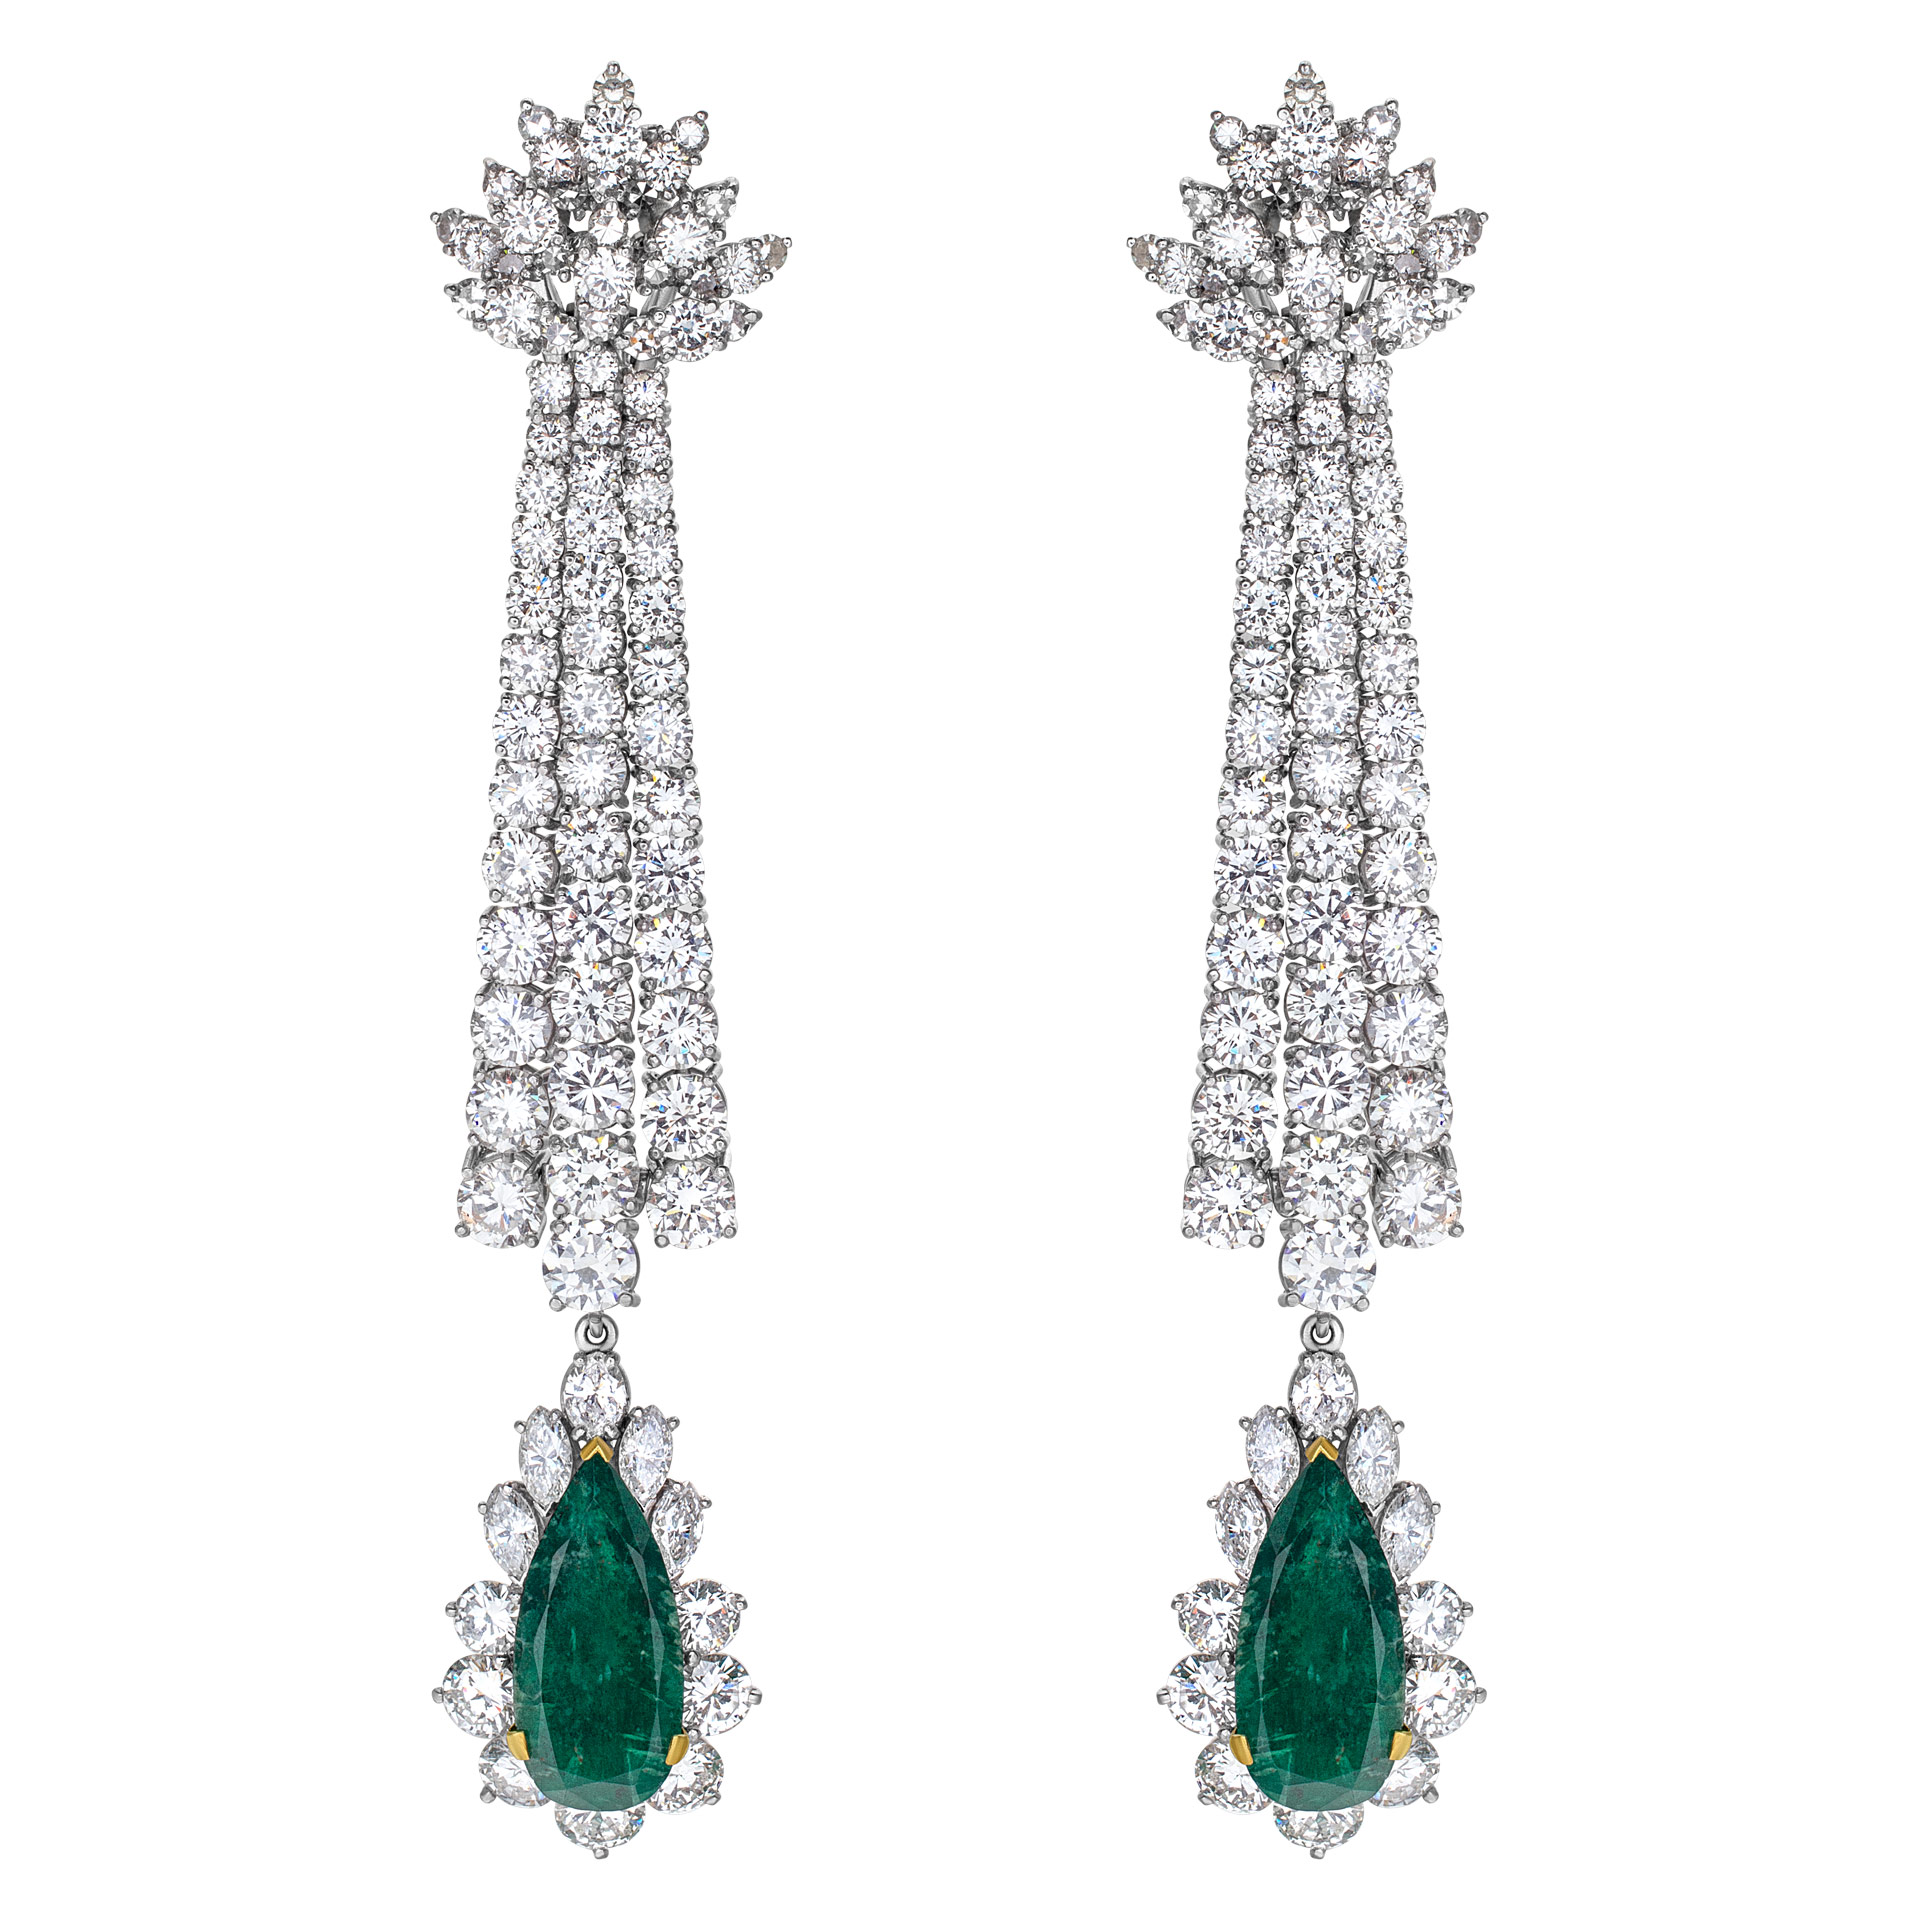 Pear & round brilliant cut diamonds with pear shape Emeralds (9.00 carats). drop earrings in platin. Diamonds total approximately weight over 20.00 carats.